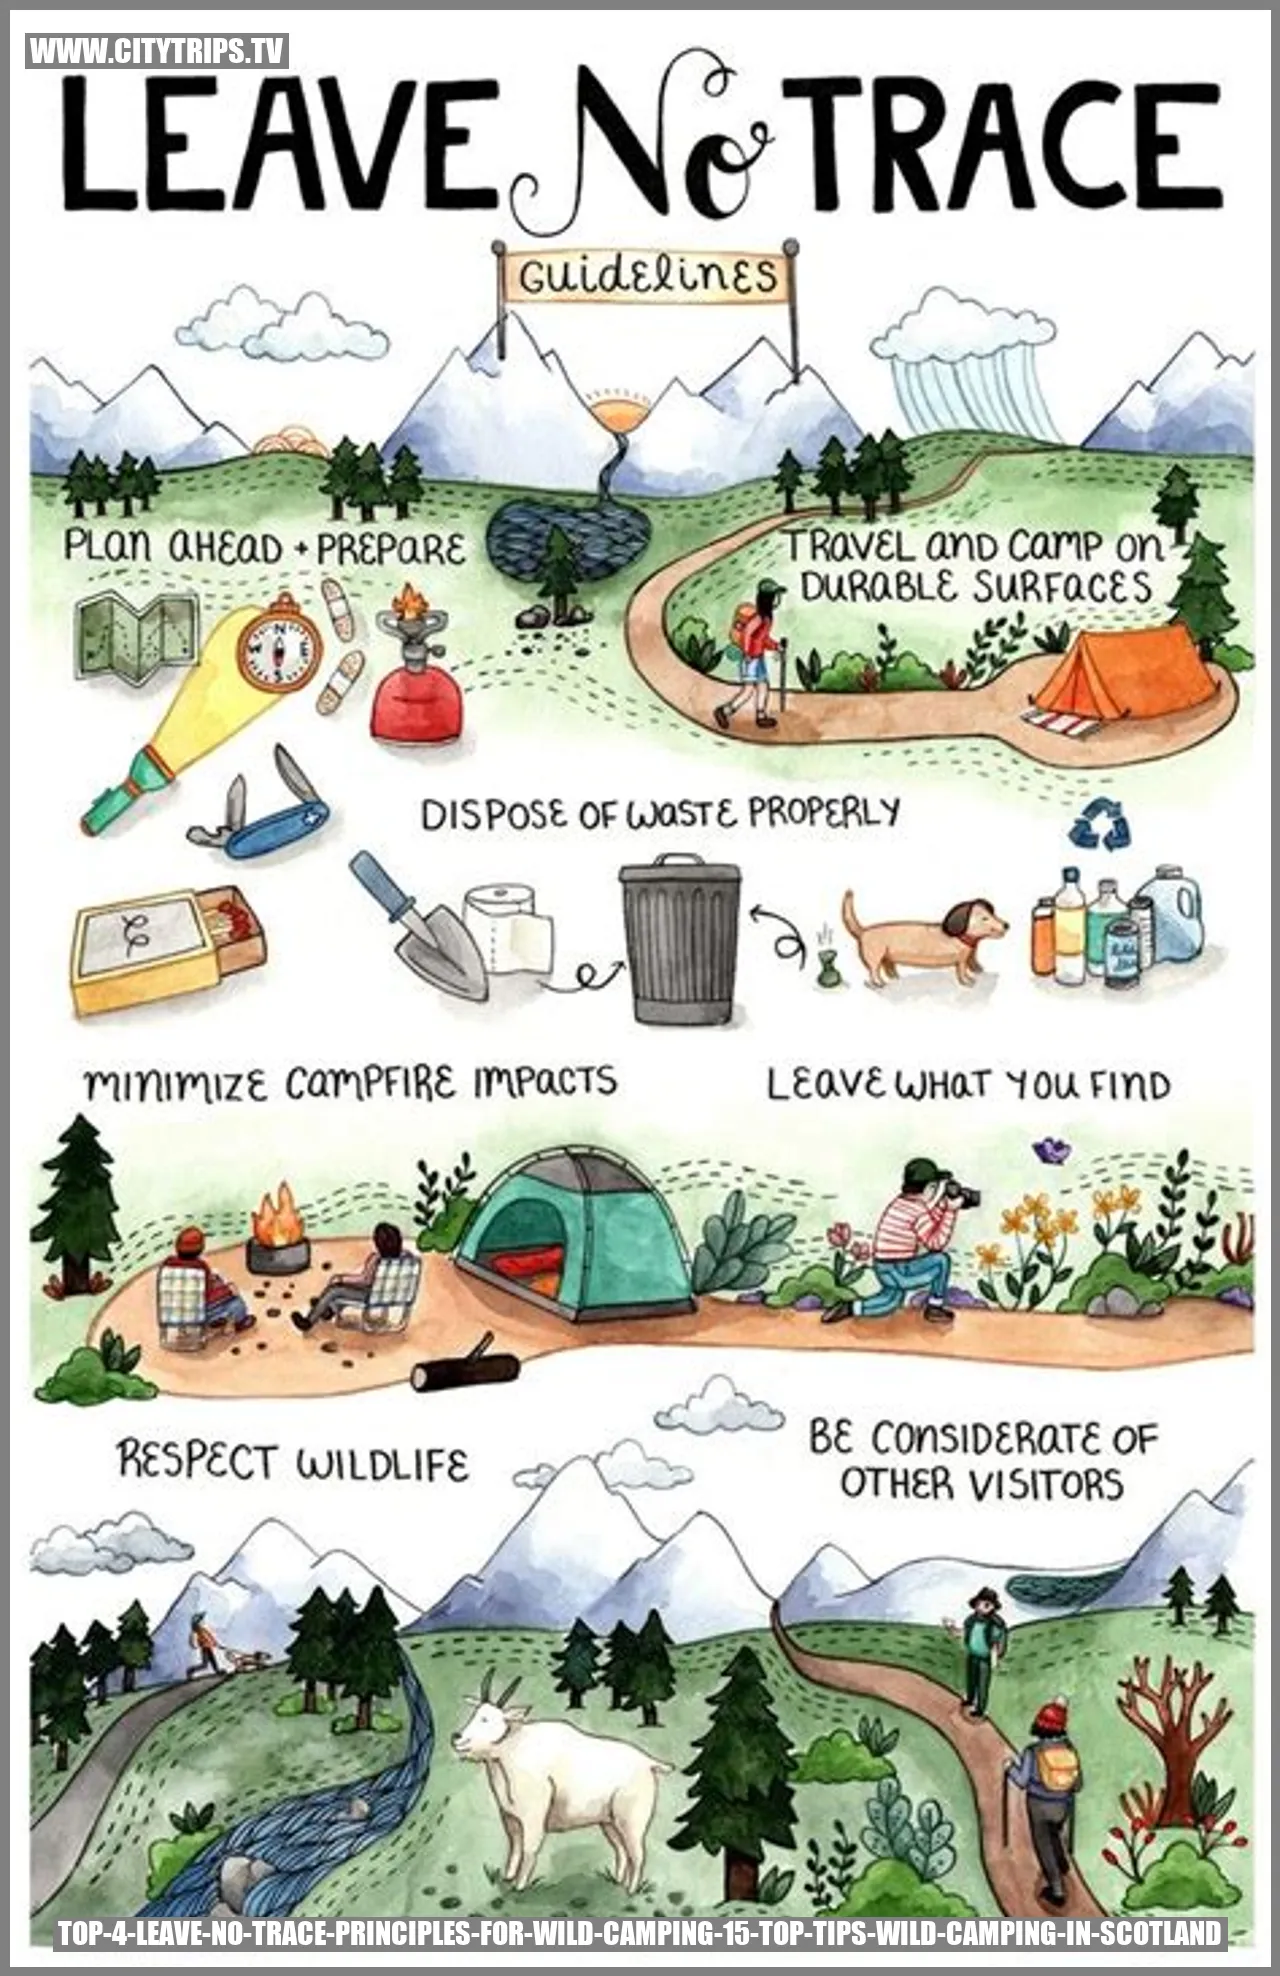 Top 4 - Leave No Trace Principles for Wild Camping